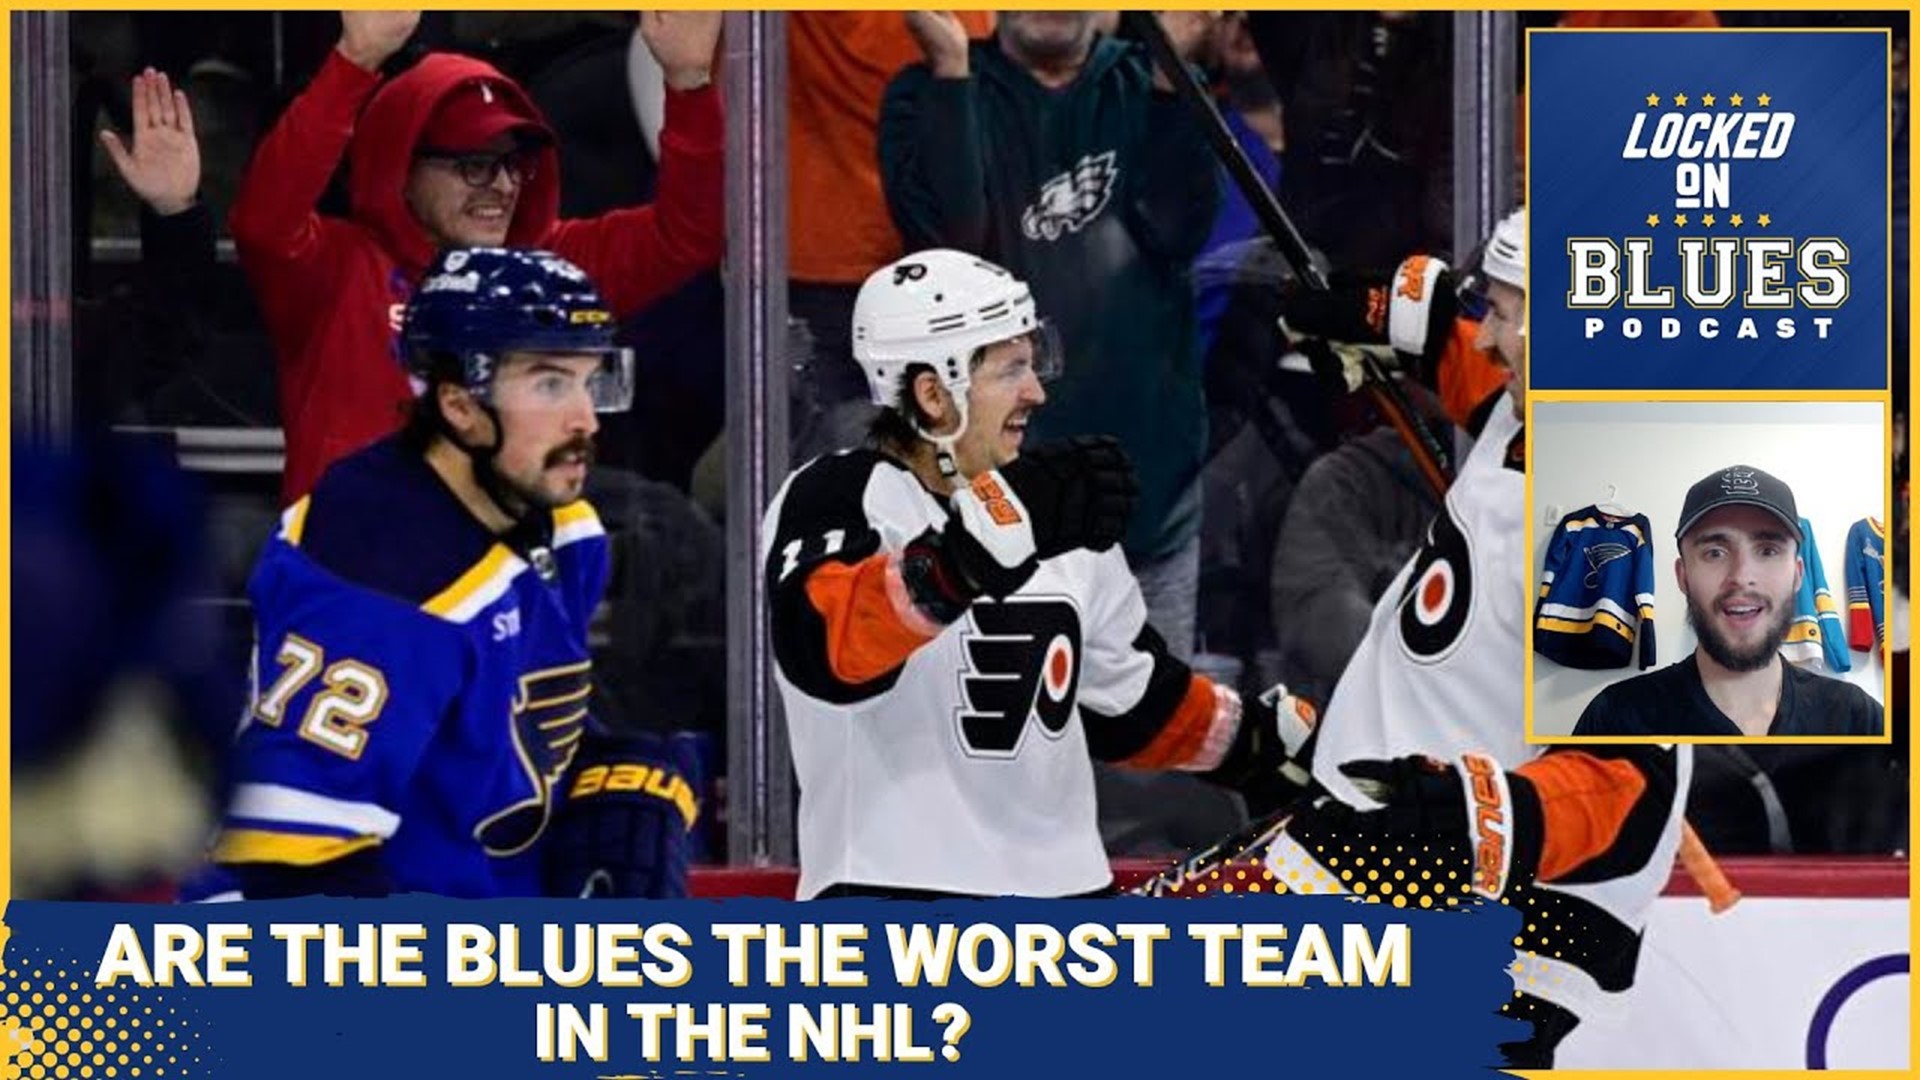 Josh Hyman covers the St. Louis Blues loss against the Flyers. He covers their franchise-record losing streak, their upcoming games, and the recent roster moves.